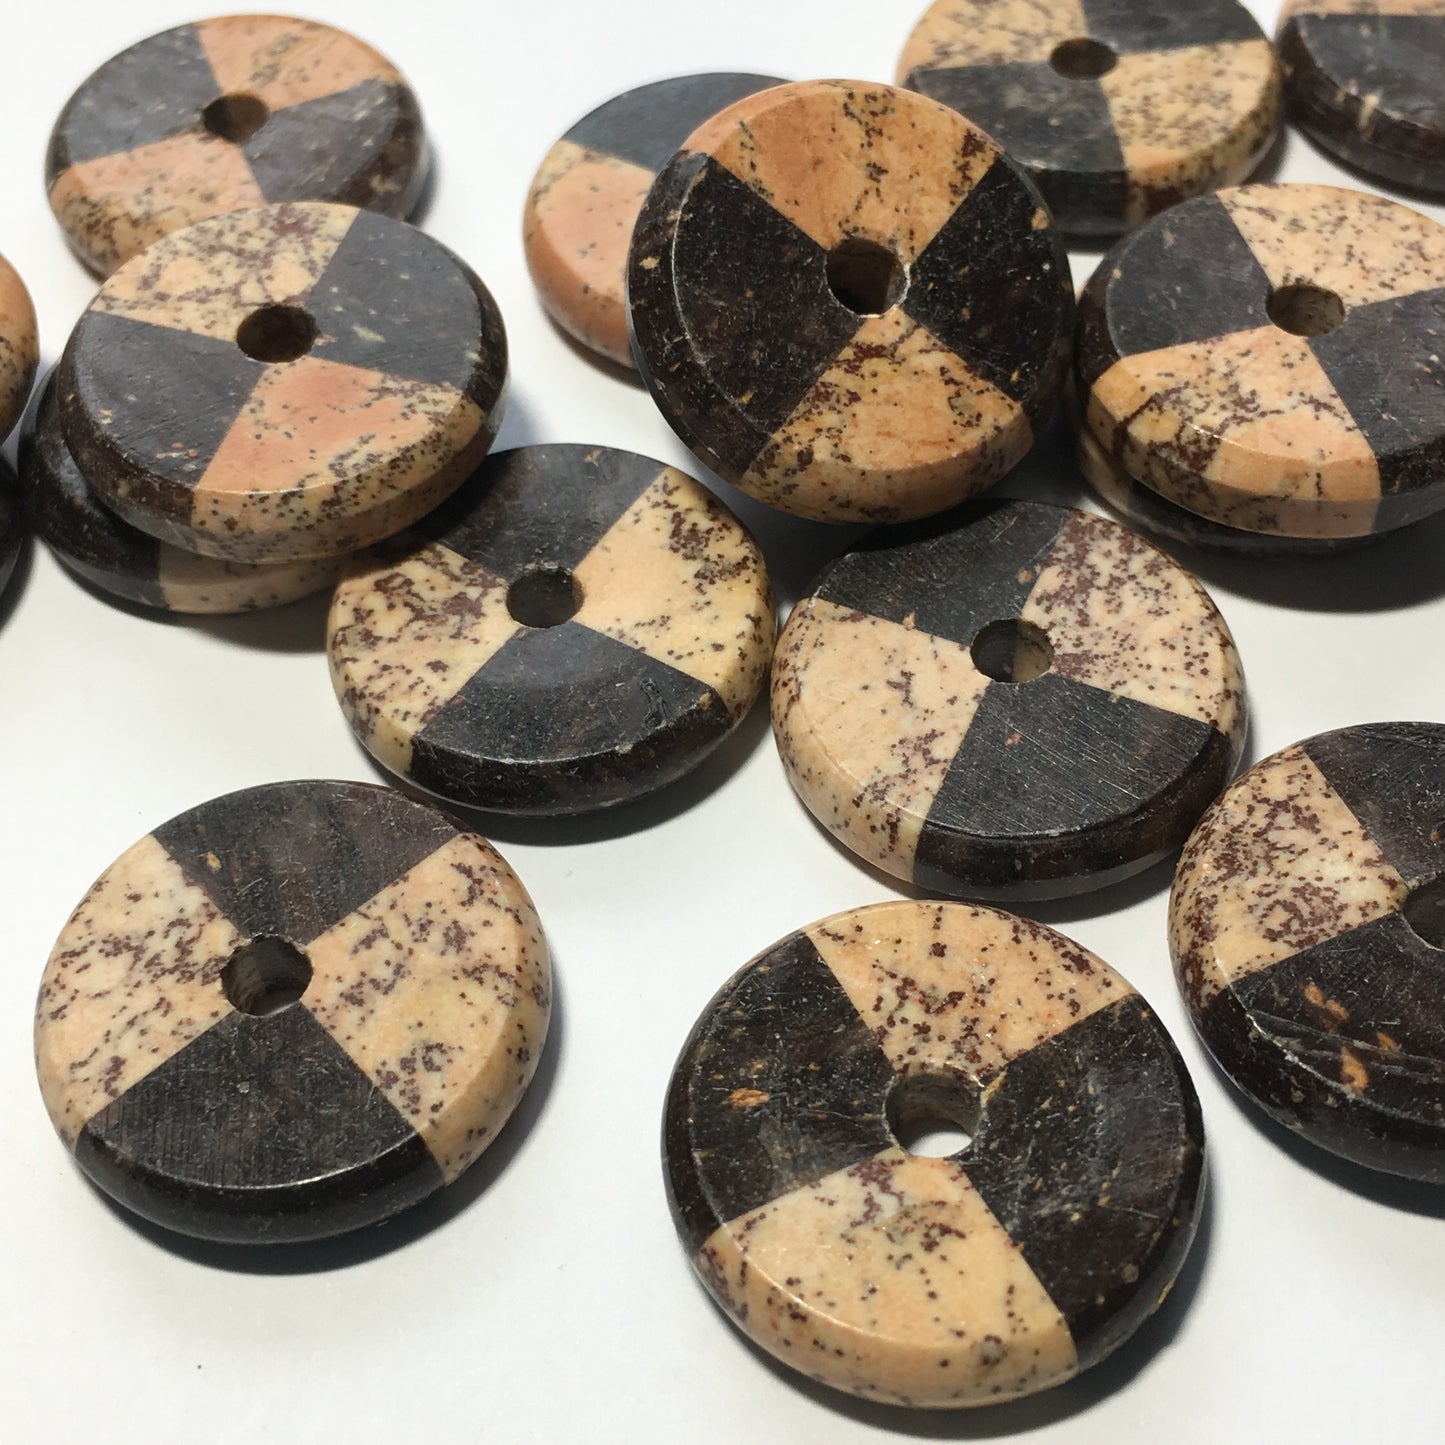 Geometric Black and Tan Natural Stone Round Disc Beads 23 mm, 6 mm Thick 19 Beads